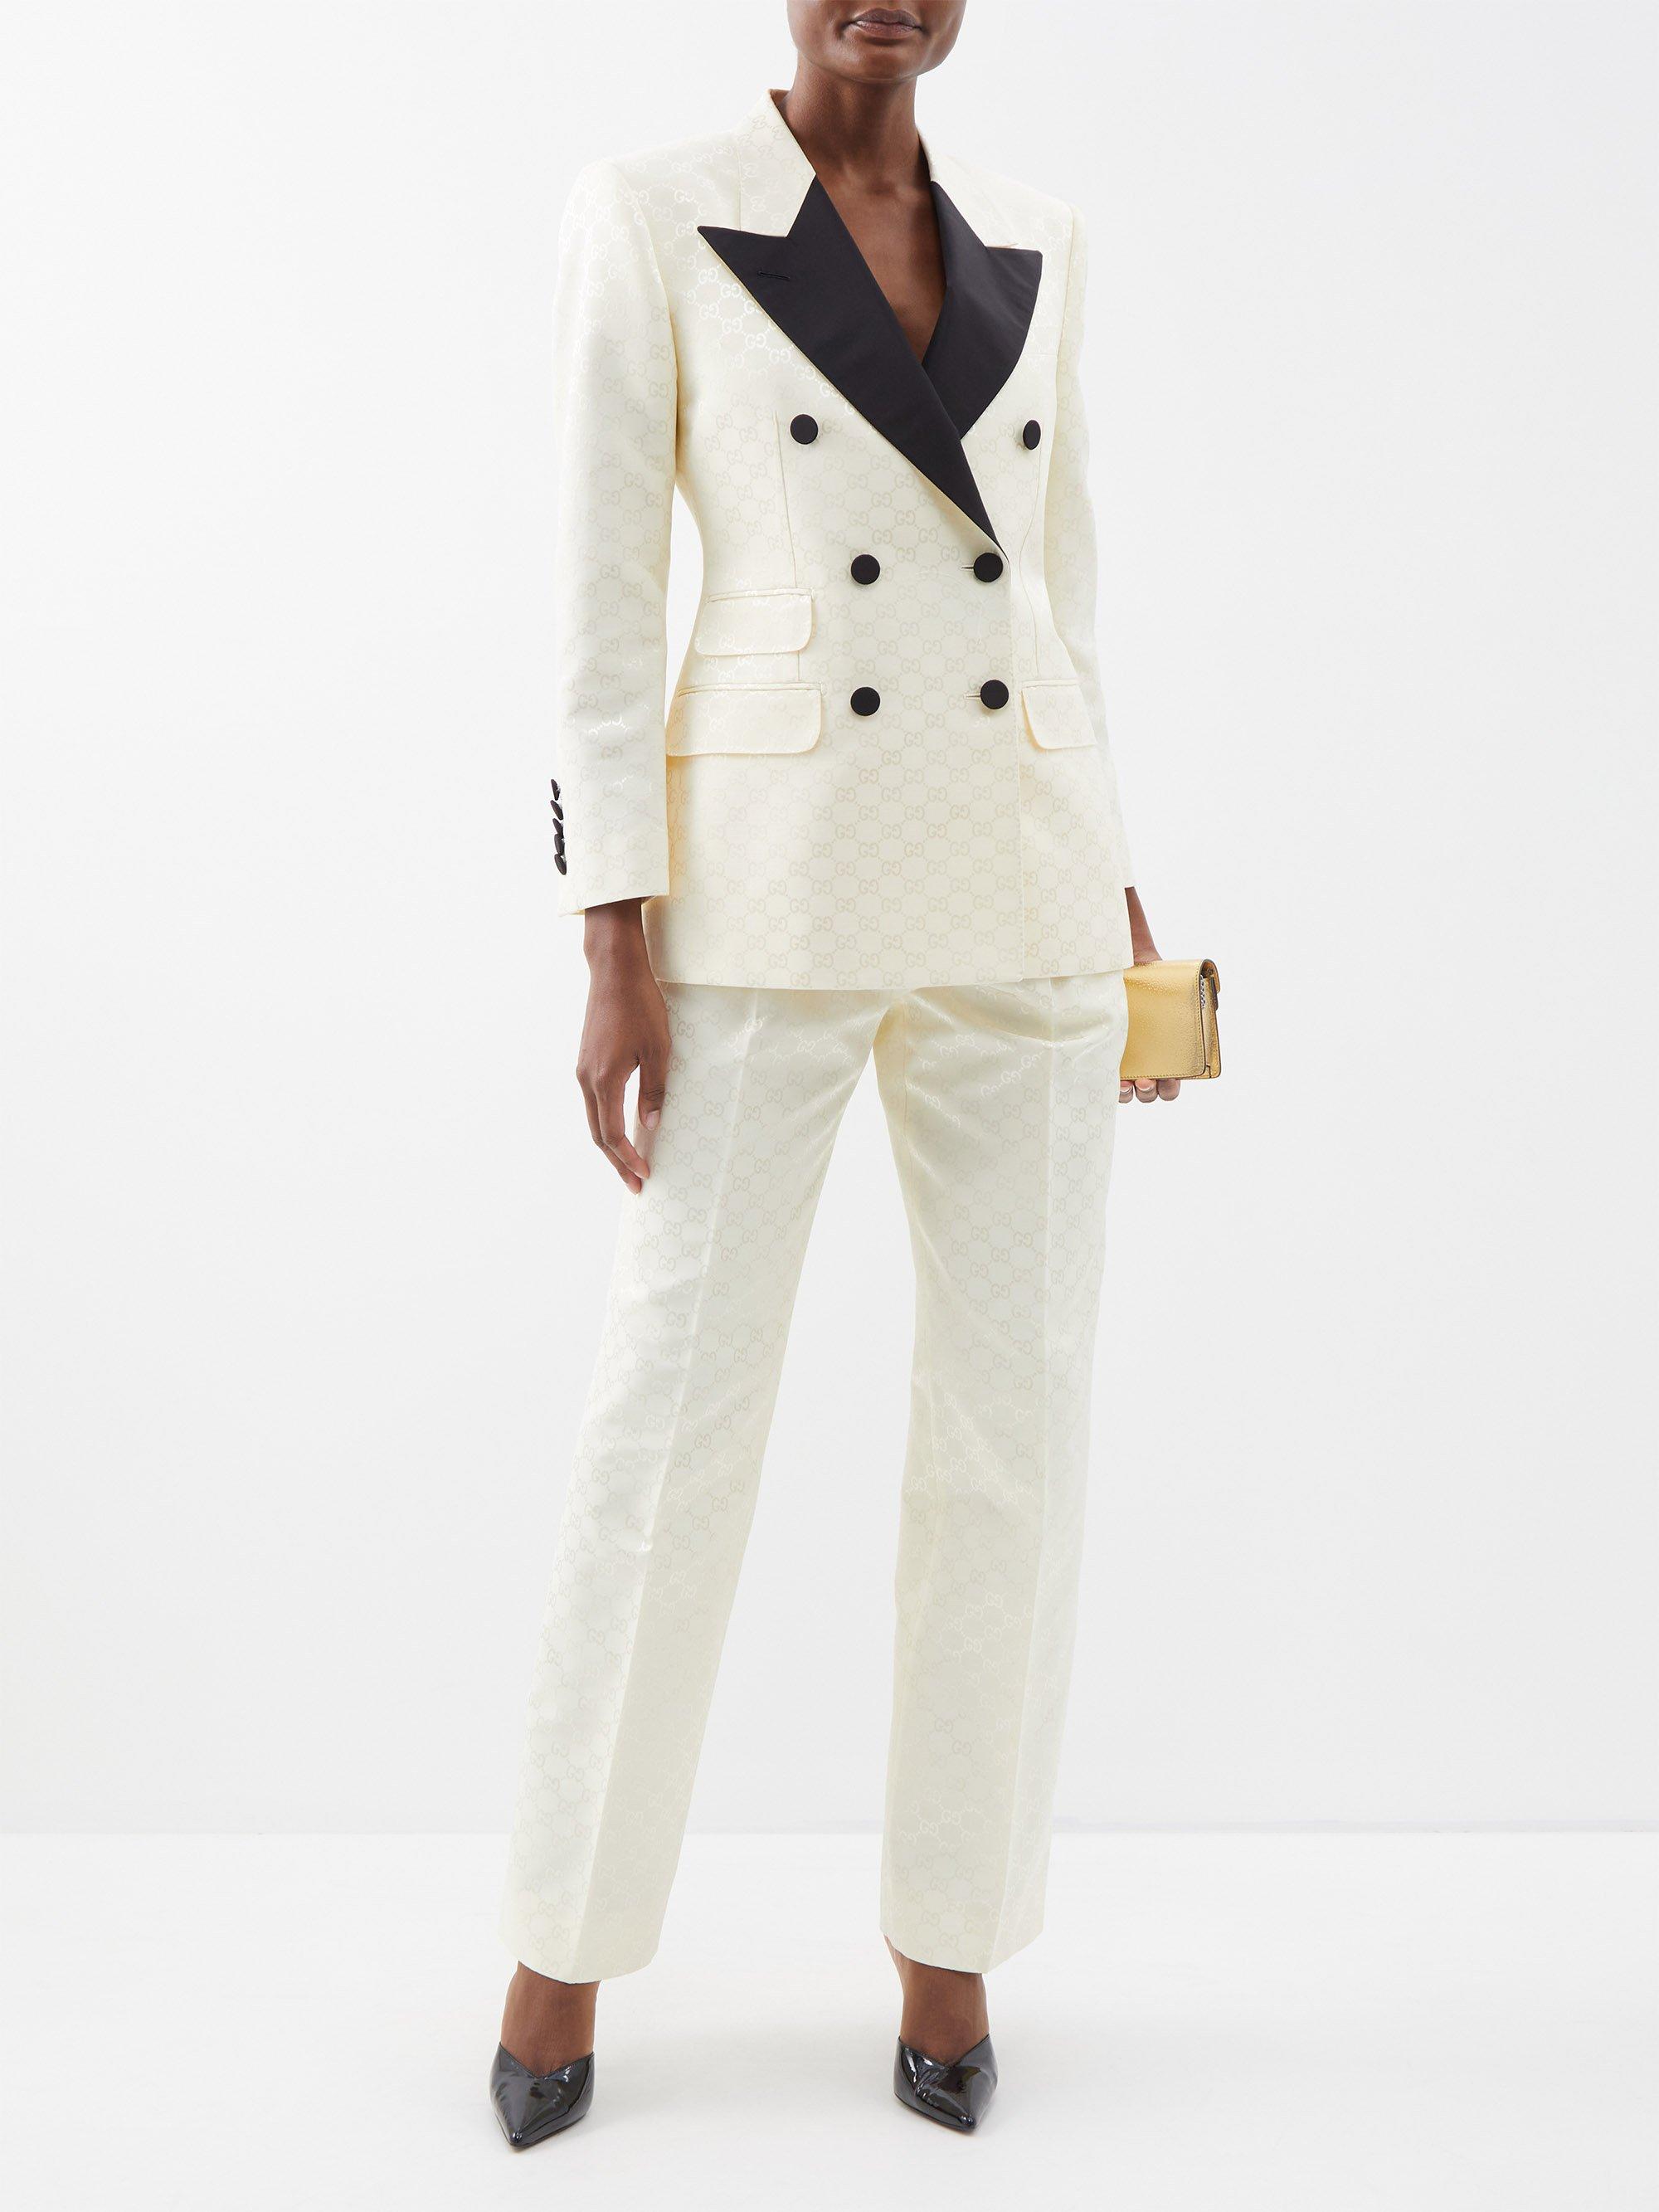 Louis Vuitton Creamy Single Breasted Blazer With Black Satin And